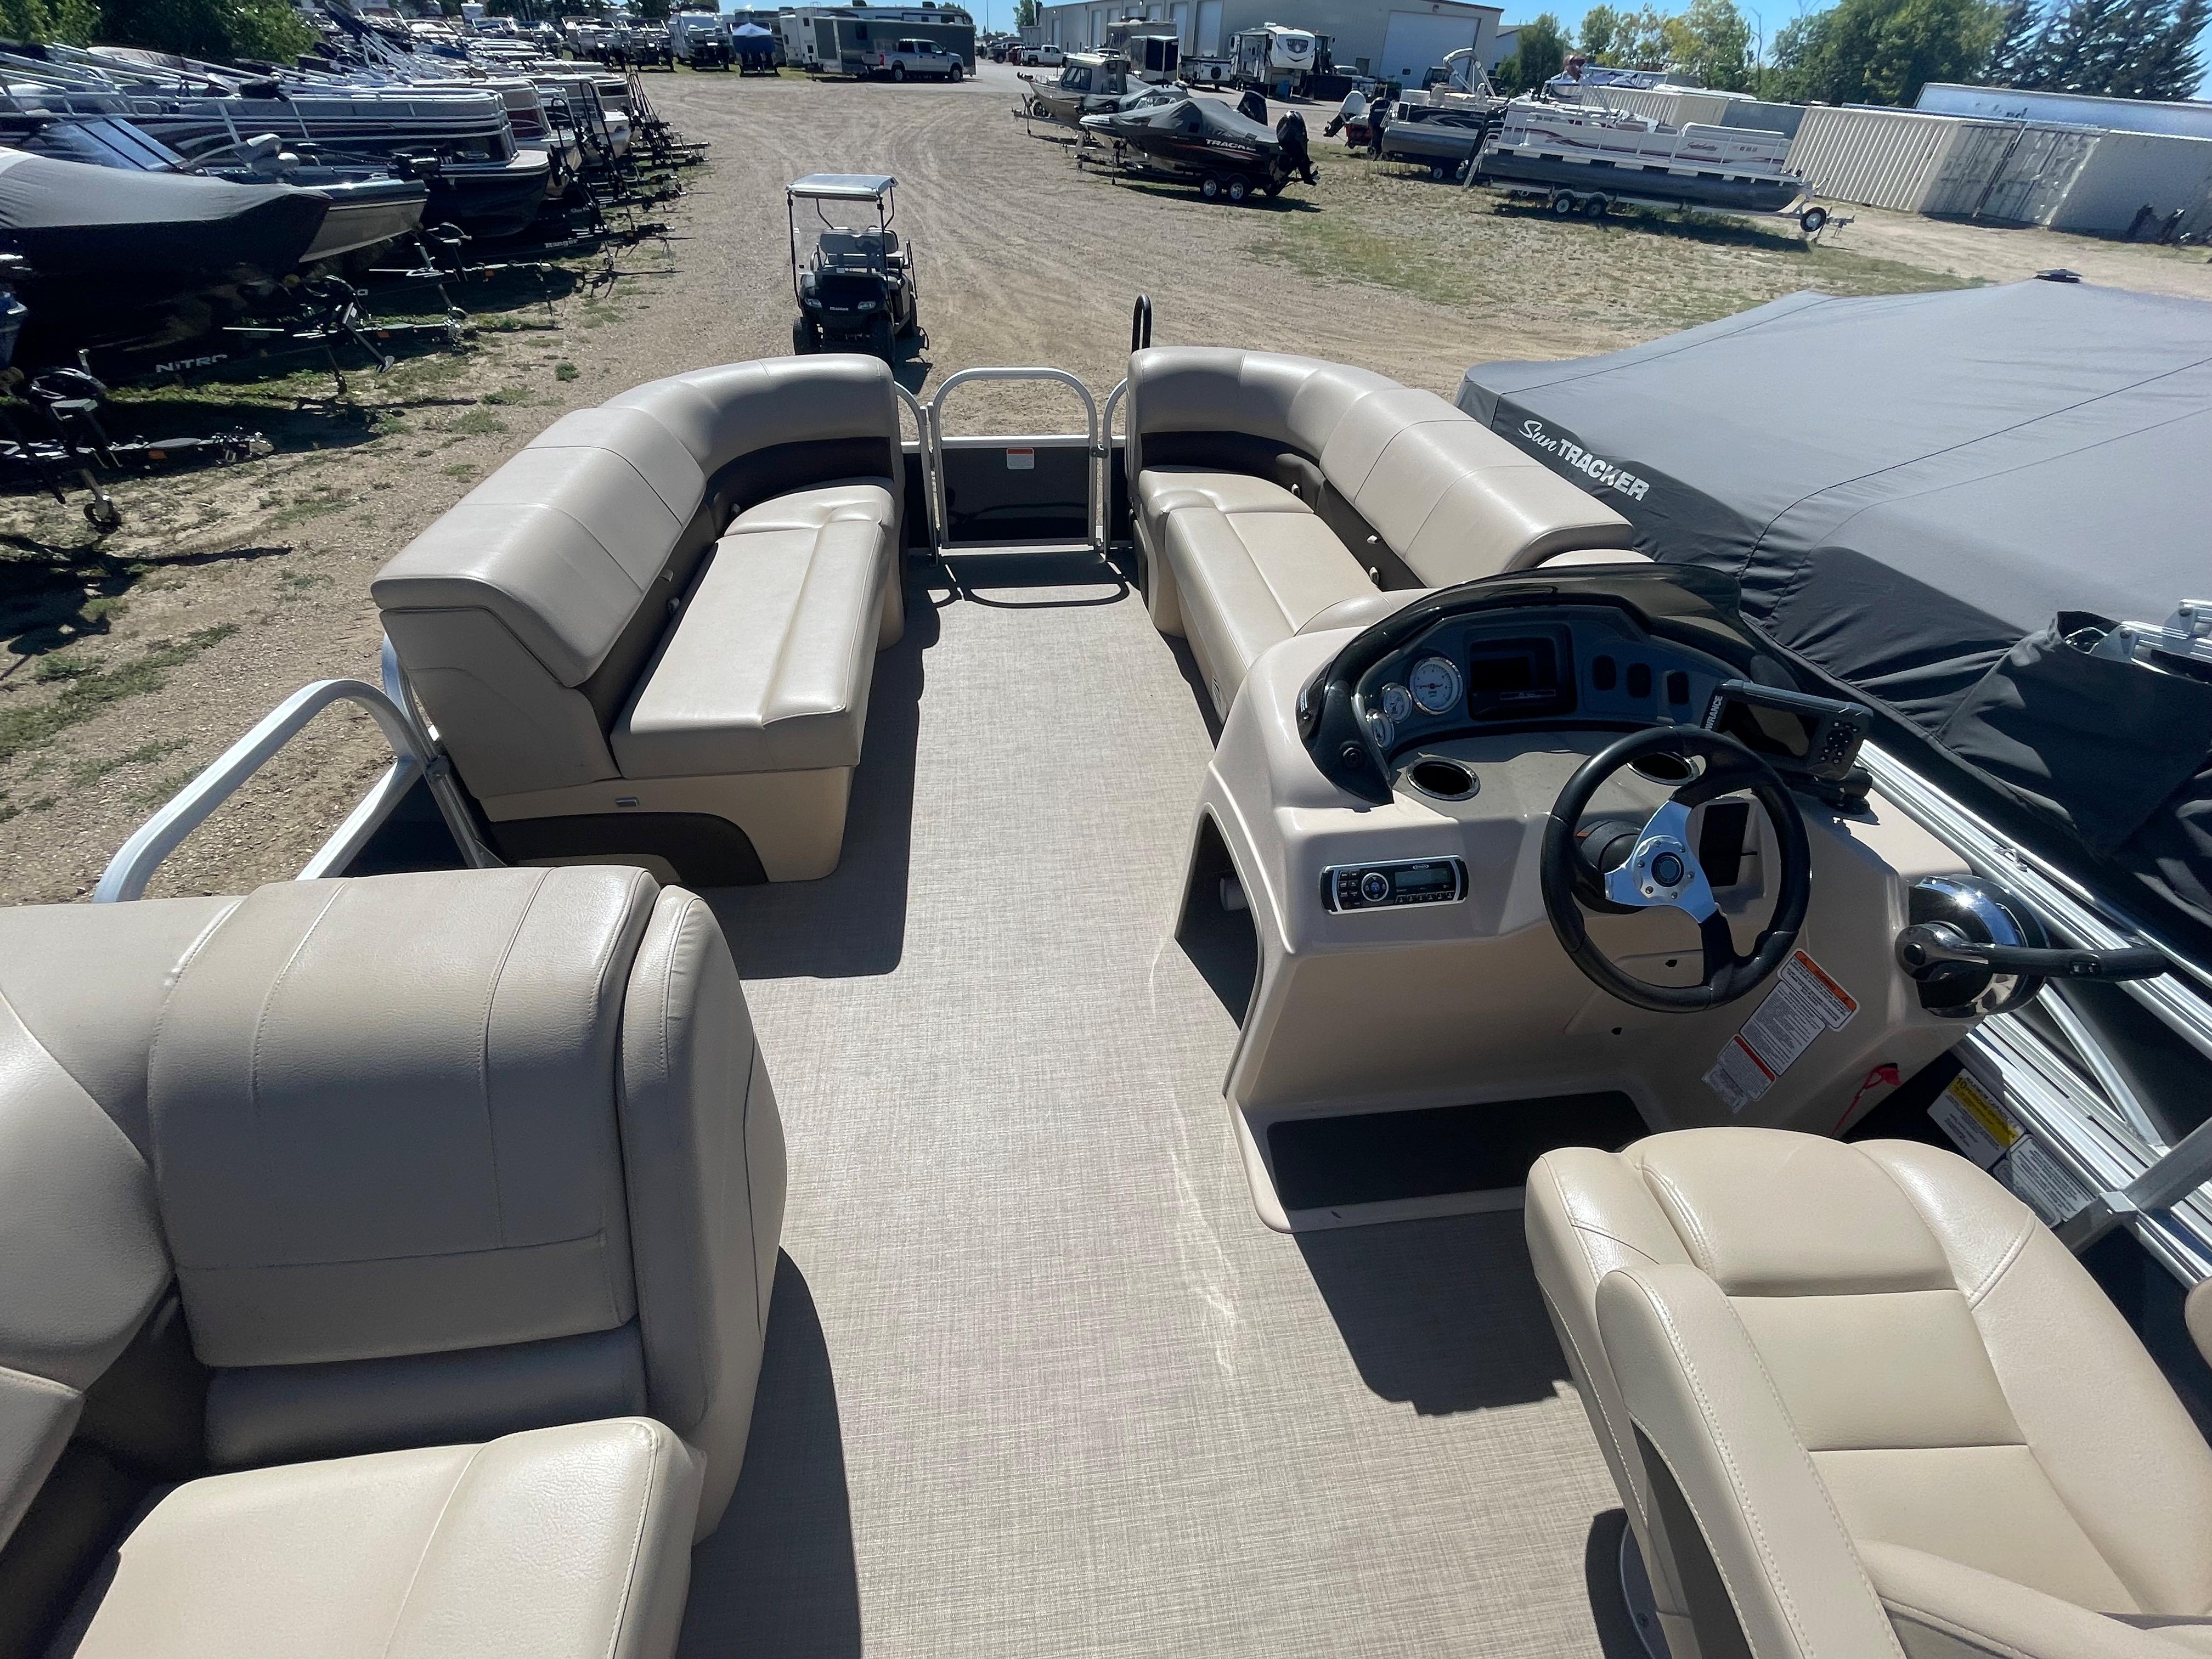 2019 Sun Tracker Party Barge 20 DLX